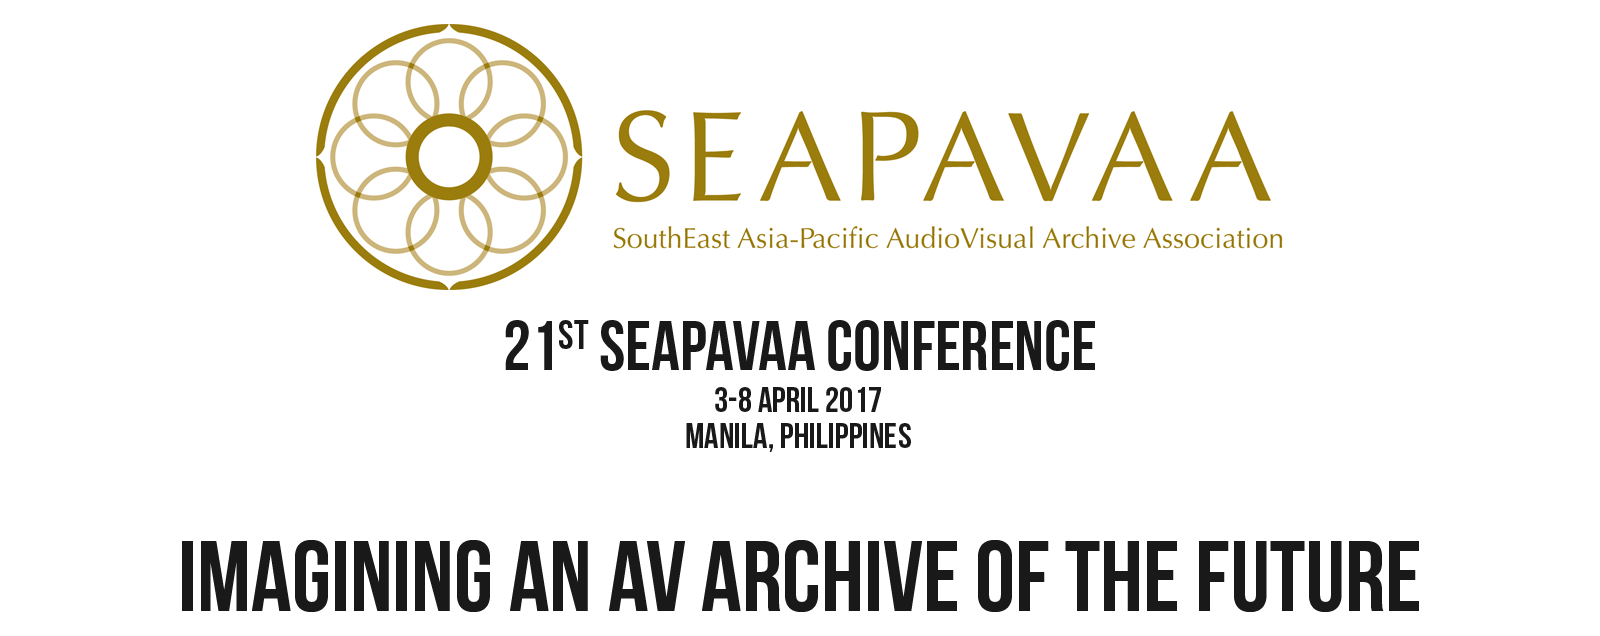 21st SEAPAVAA conference to receive sponsorship main image